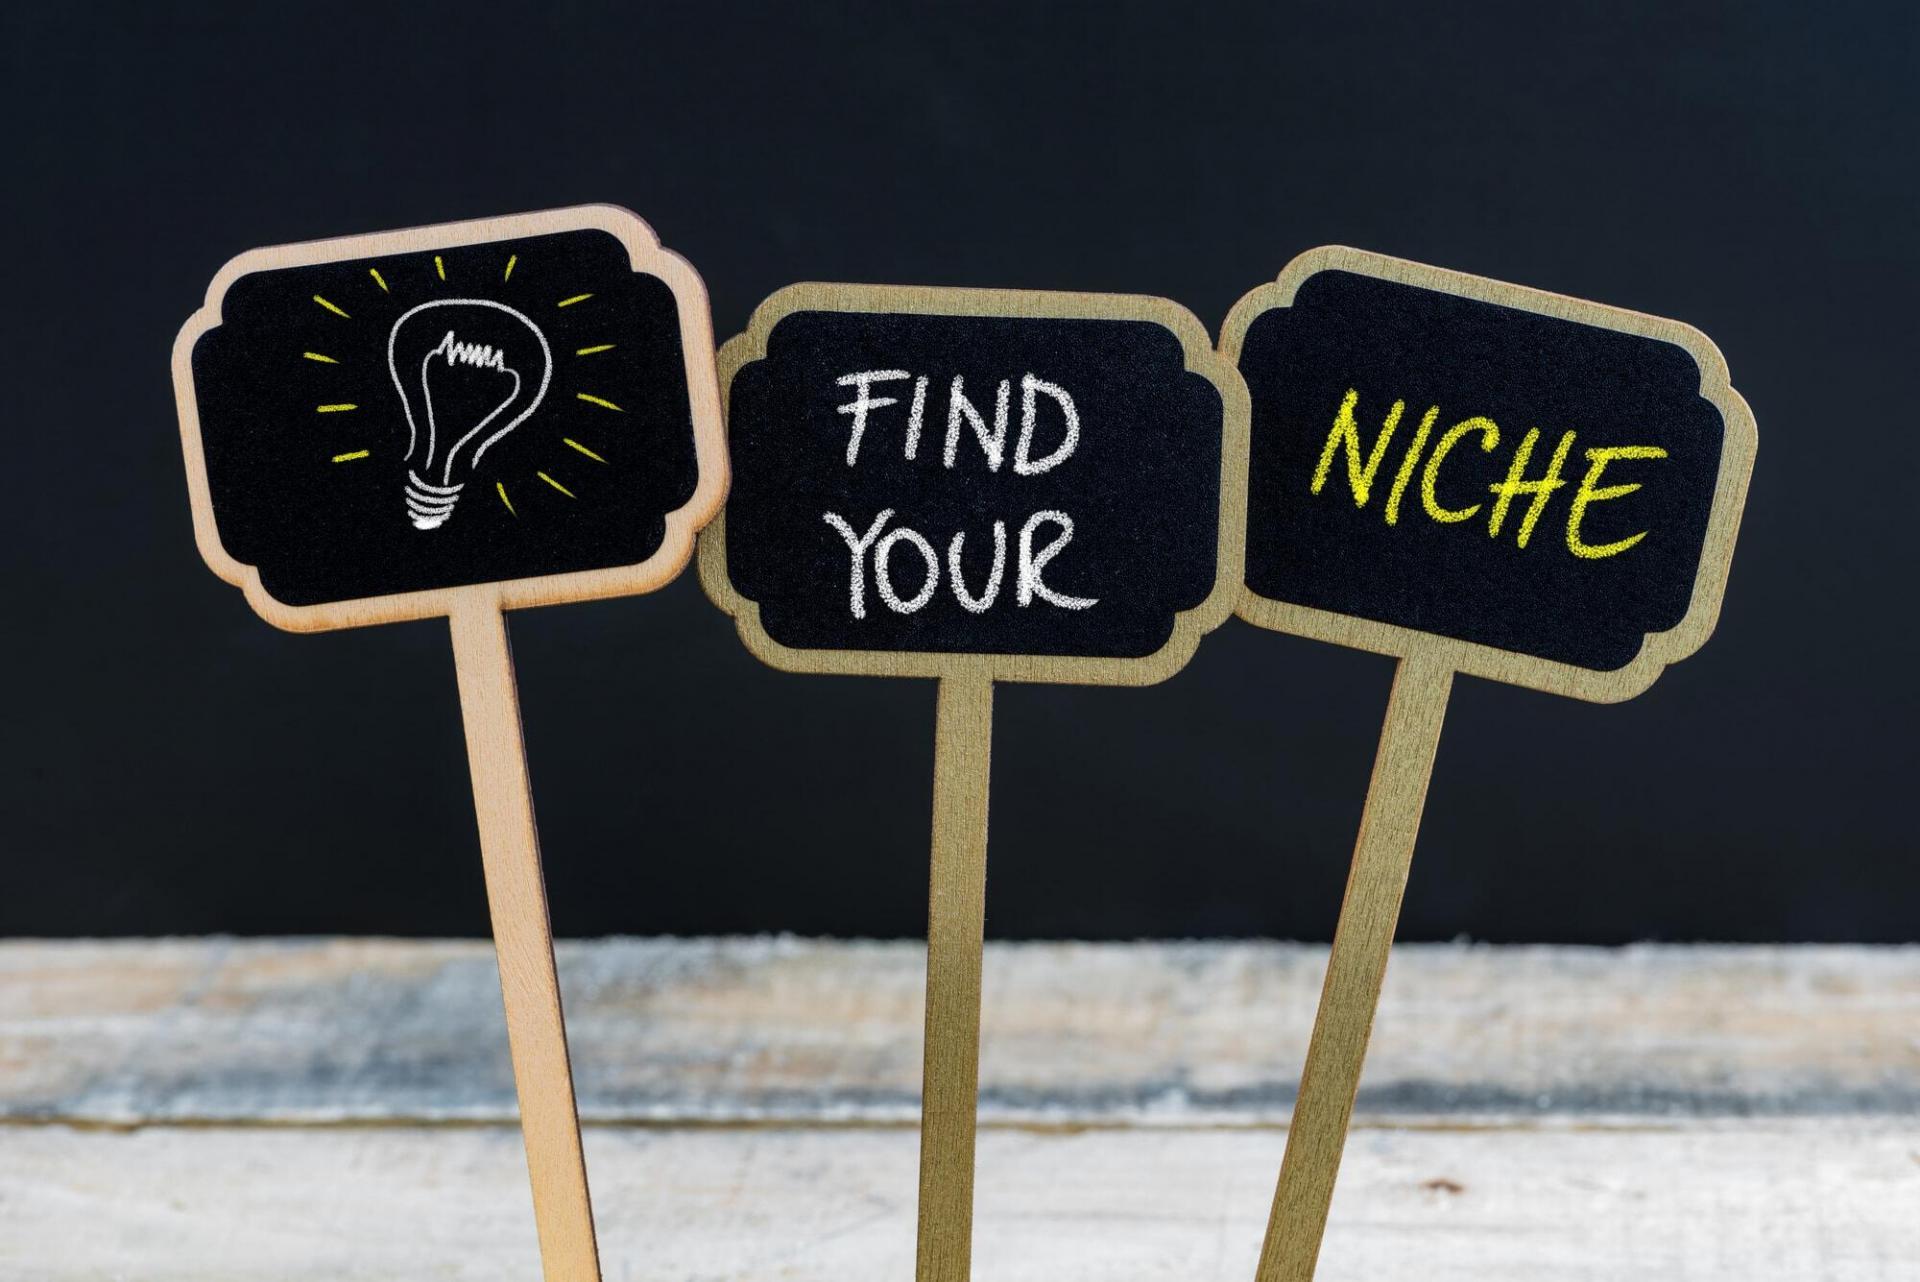 Writing an SEO Blog: How to Find Your Niche